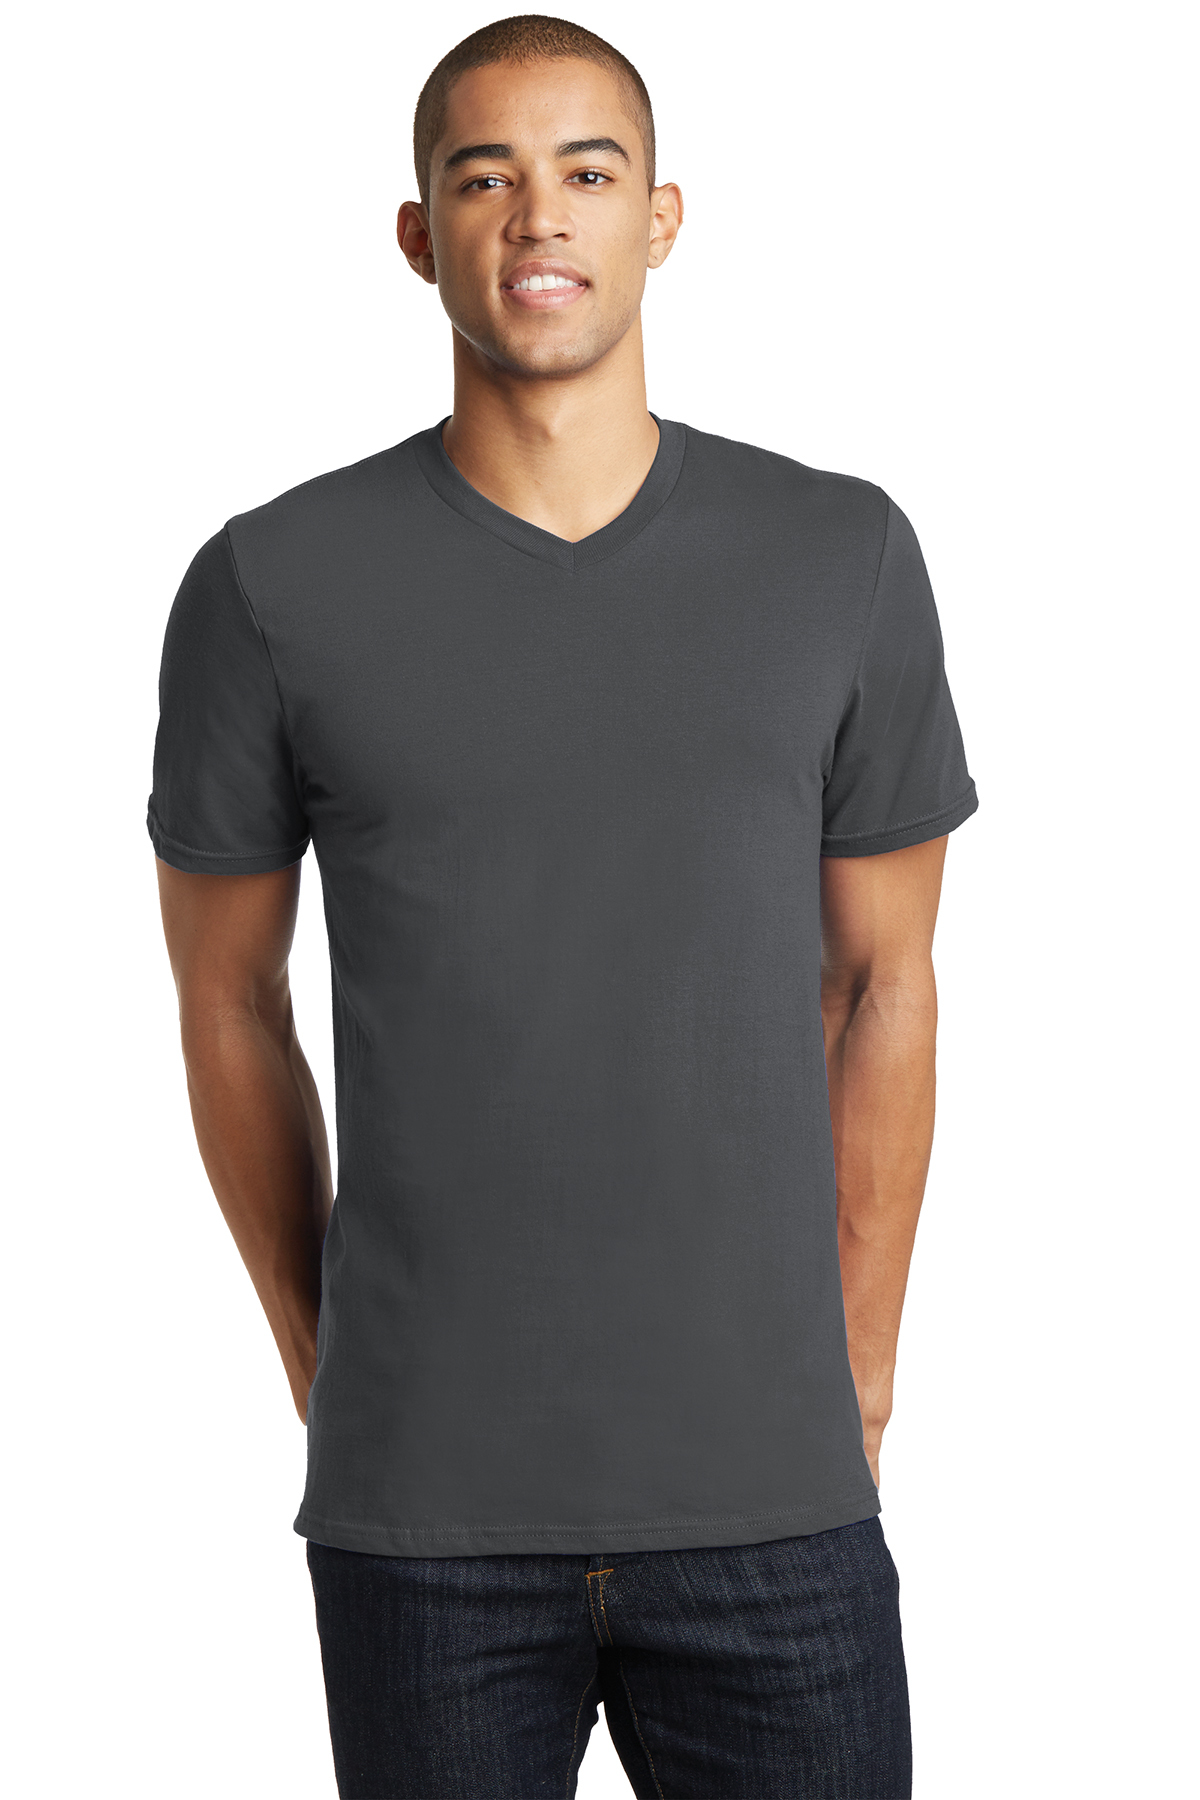 District - Young Mens The Concert Tee V-Neck | Product | District